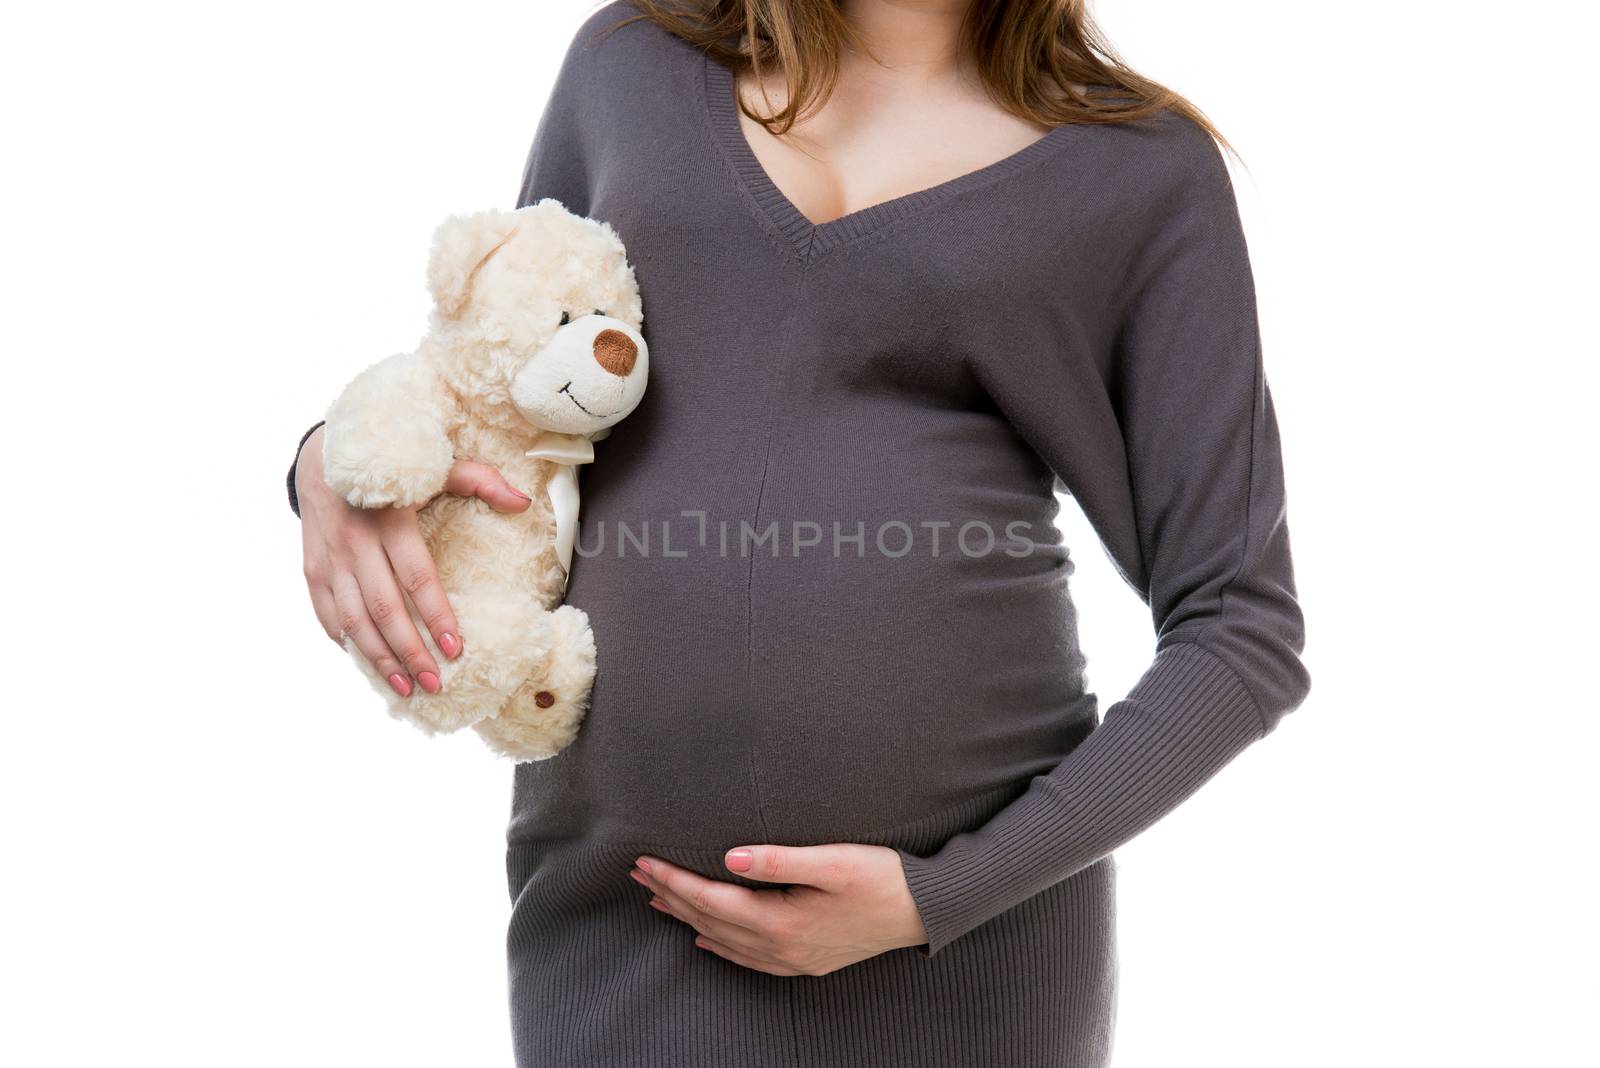 pregnant woman in a gray dress with a teddy bear isolated on white background